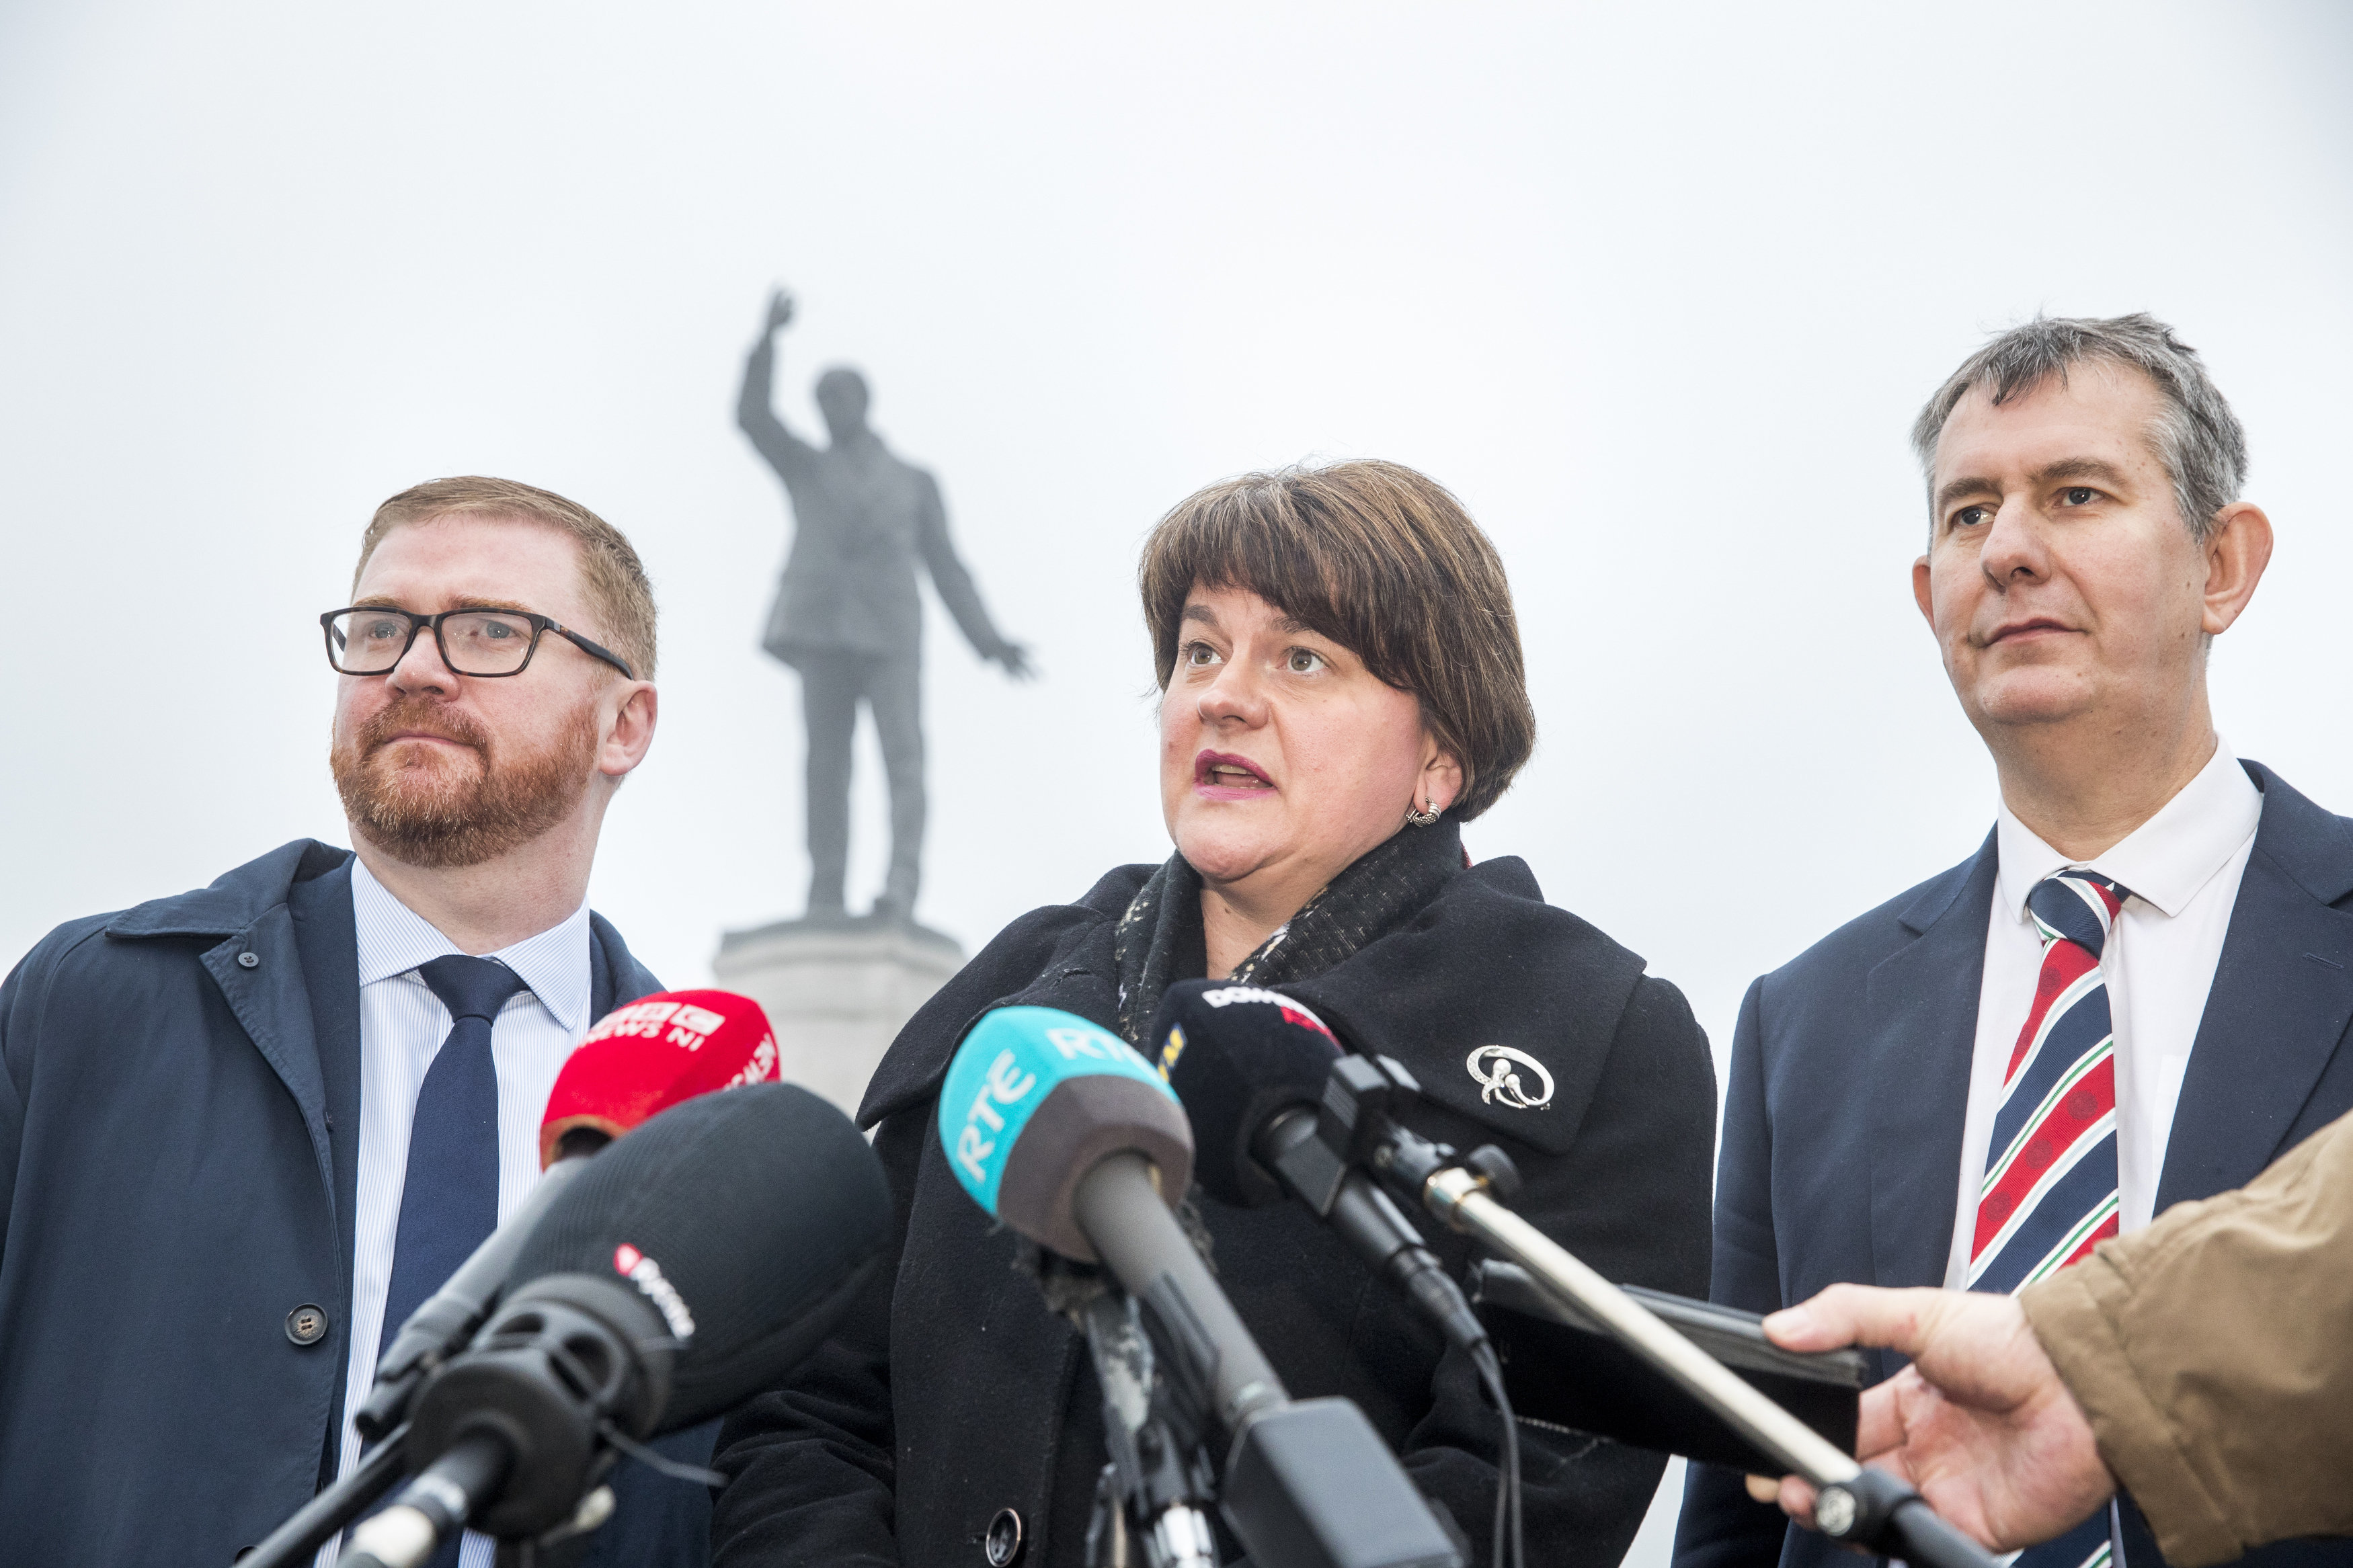 <strong>DUP leader Arlene Foster, with party colleagues Simon Hamilton and Edwin Poots (right), speaks with media at Carson Statue</strong>